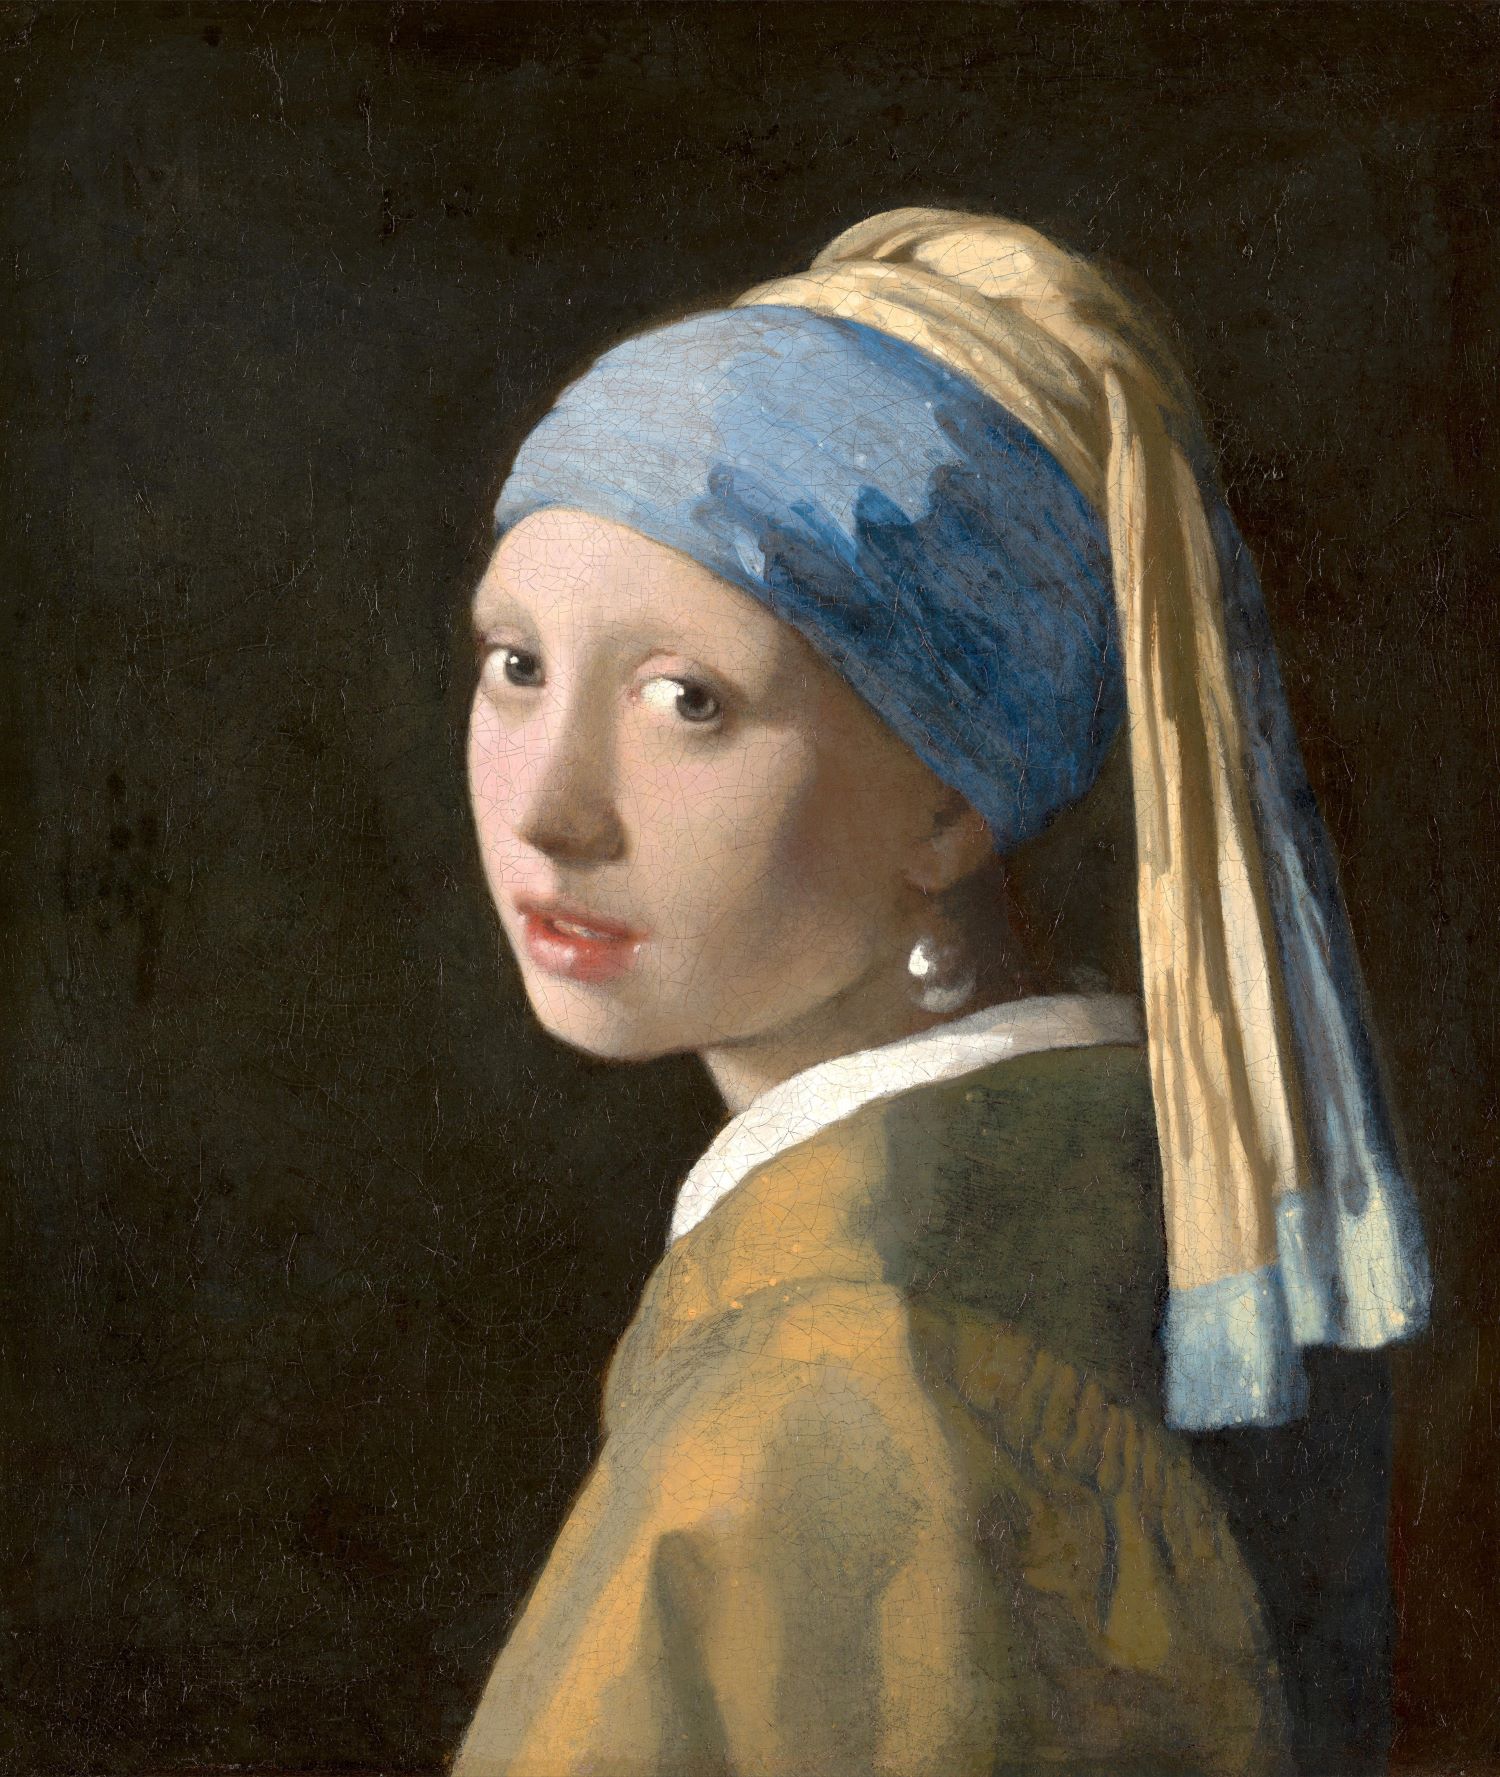 Vermeer painting Girl with a Pearl Earring